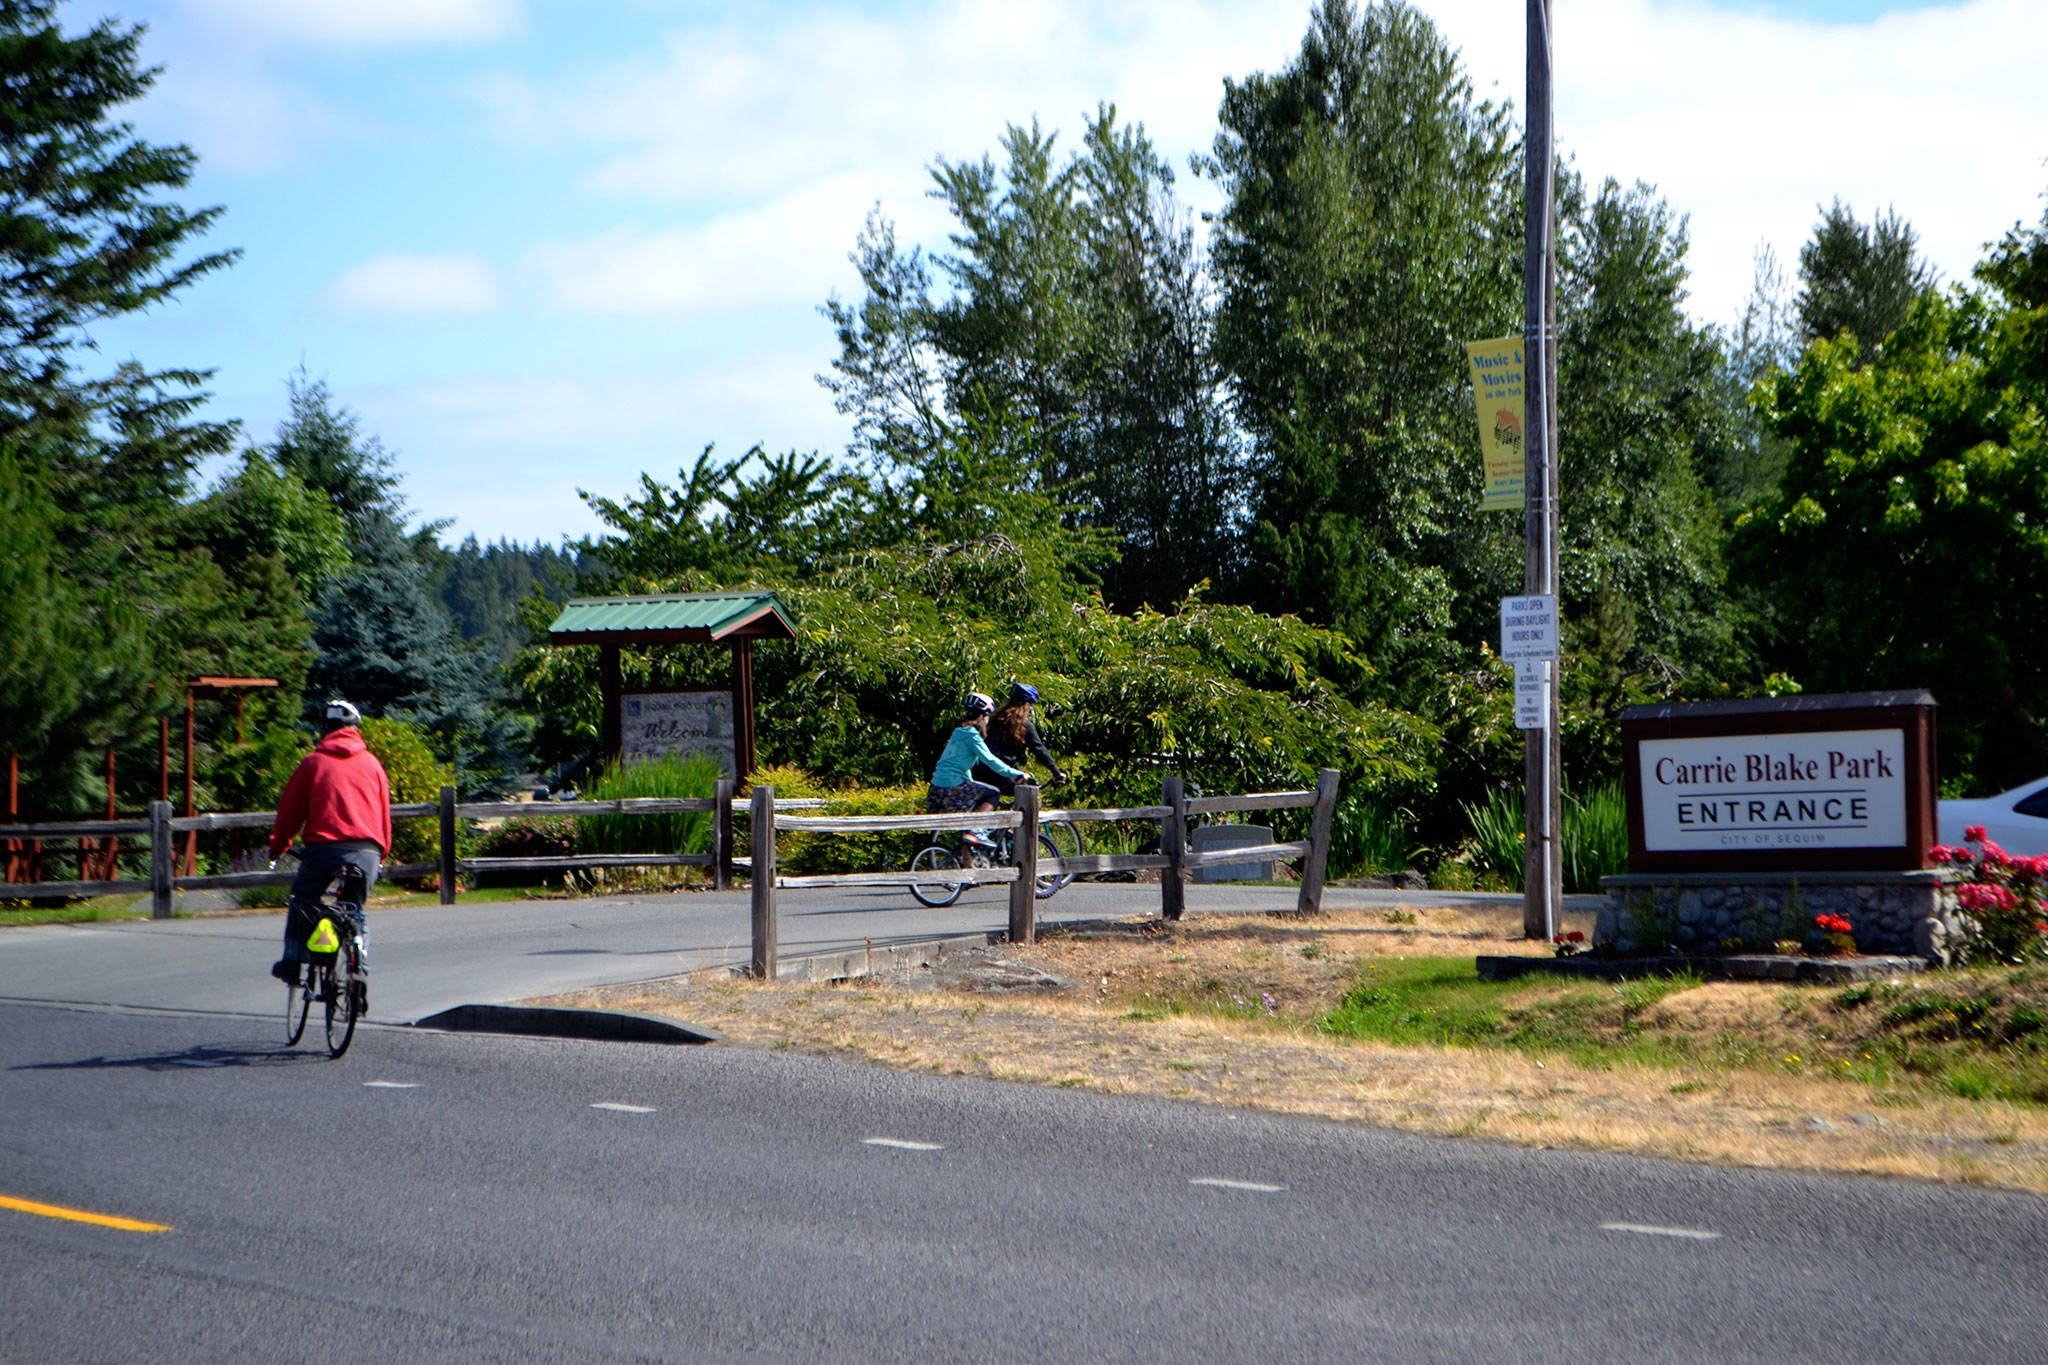 Visitors to Carrie Blake Park off North Blake Avenue in Sequim will soon enter the park through a new gateway. Construction crews break ground in August to realign the entrance between the Sequim Skate Park and Trinity United Methodist Church. (Matthew Nash/Olympic Peninsula News Group)